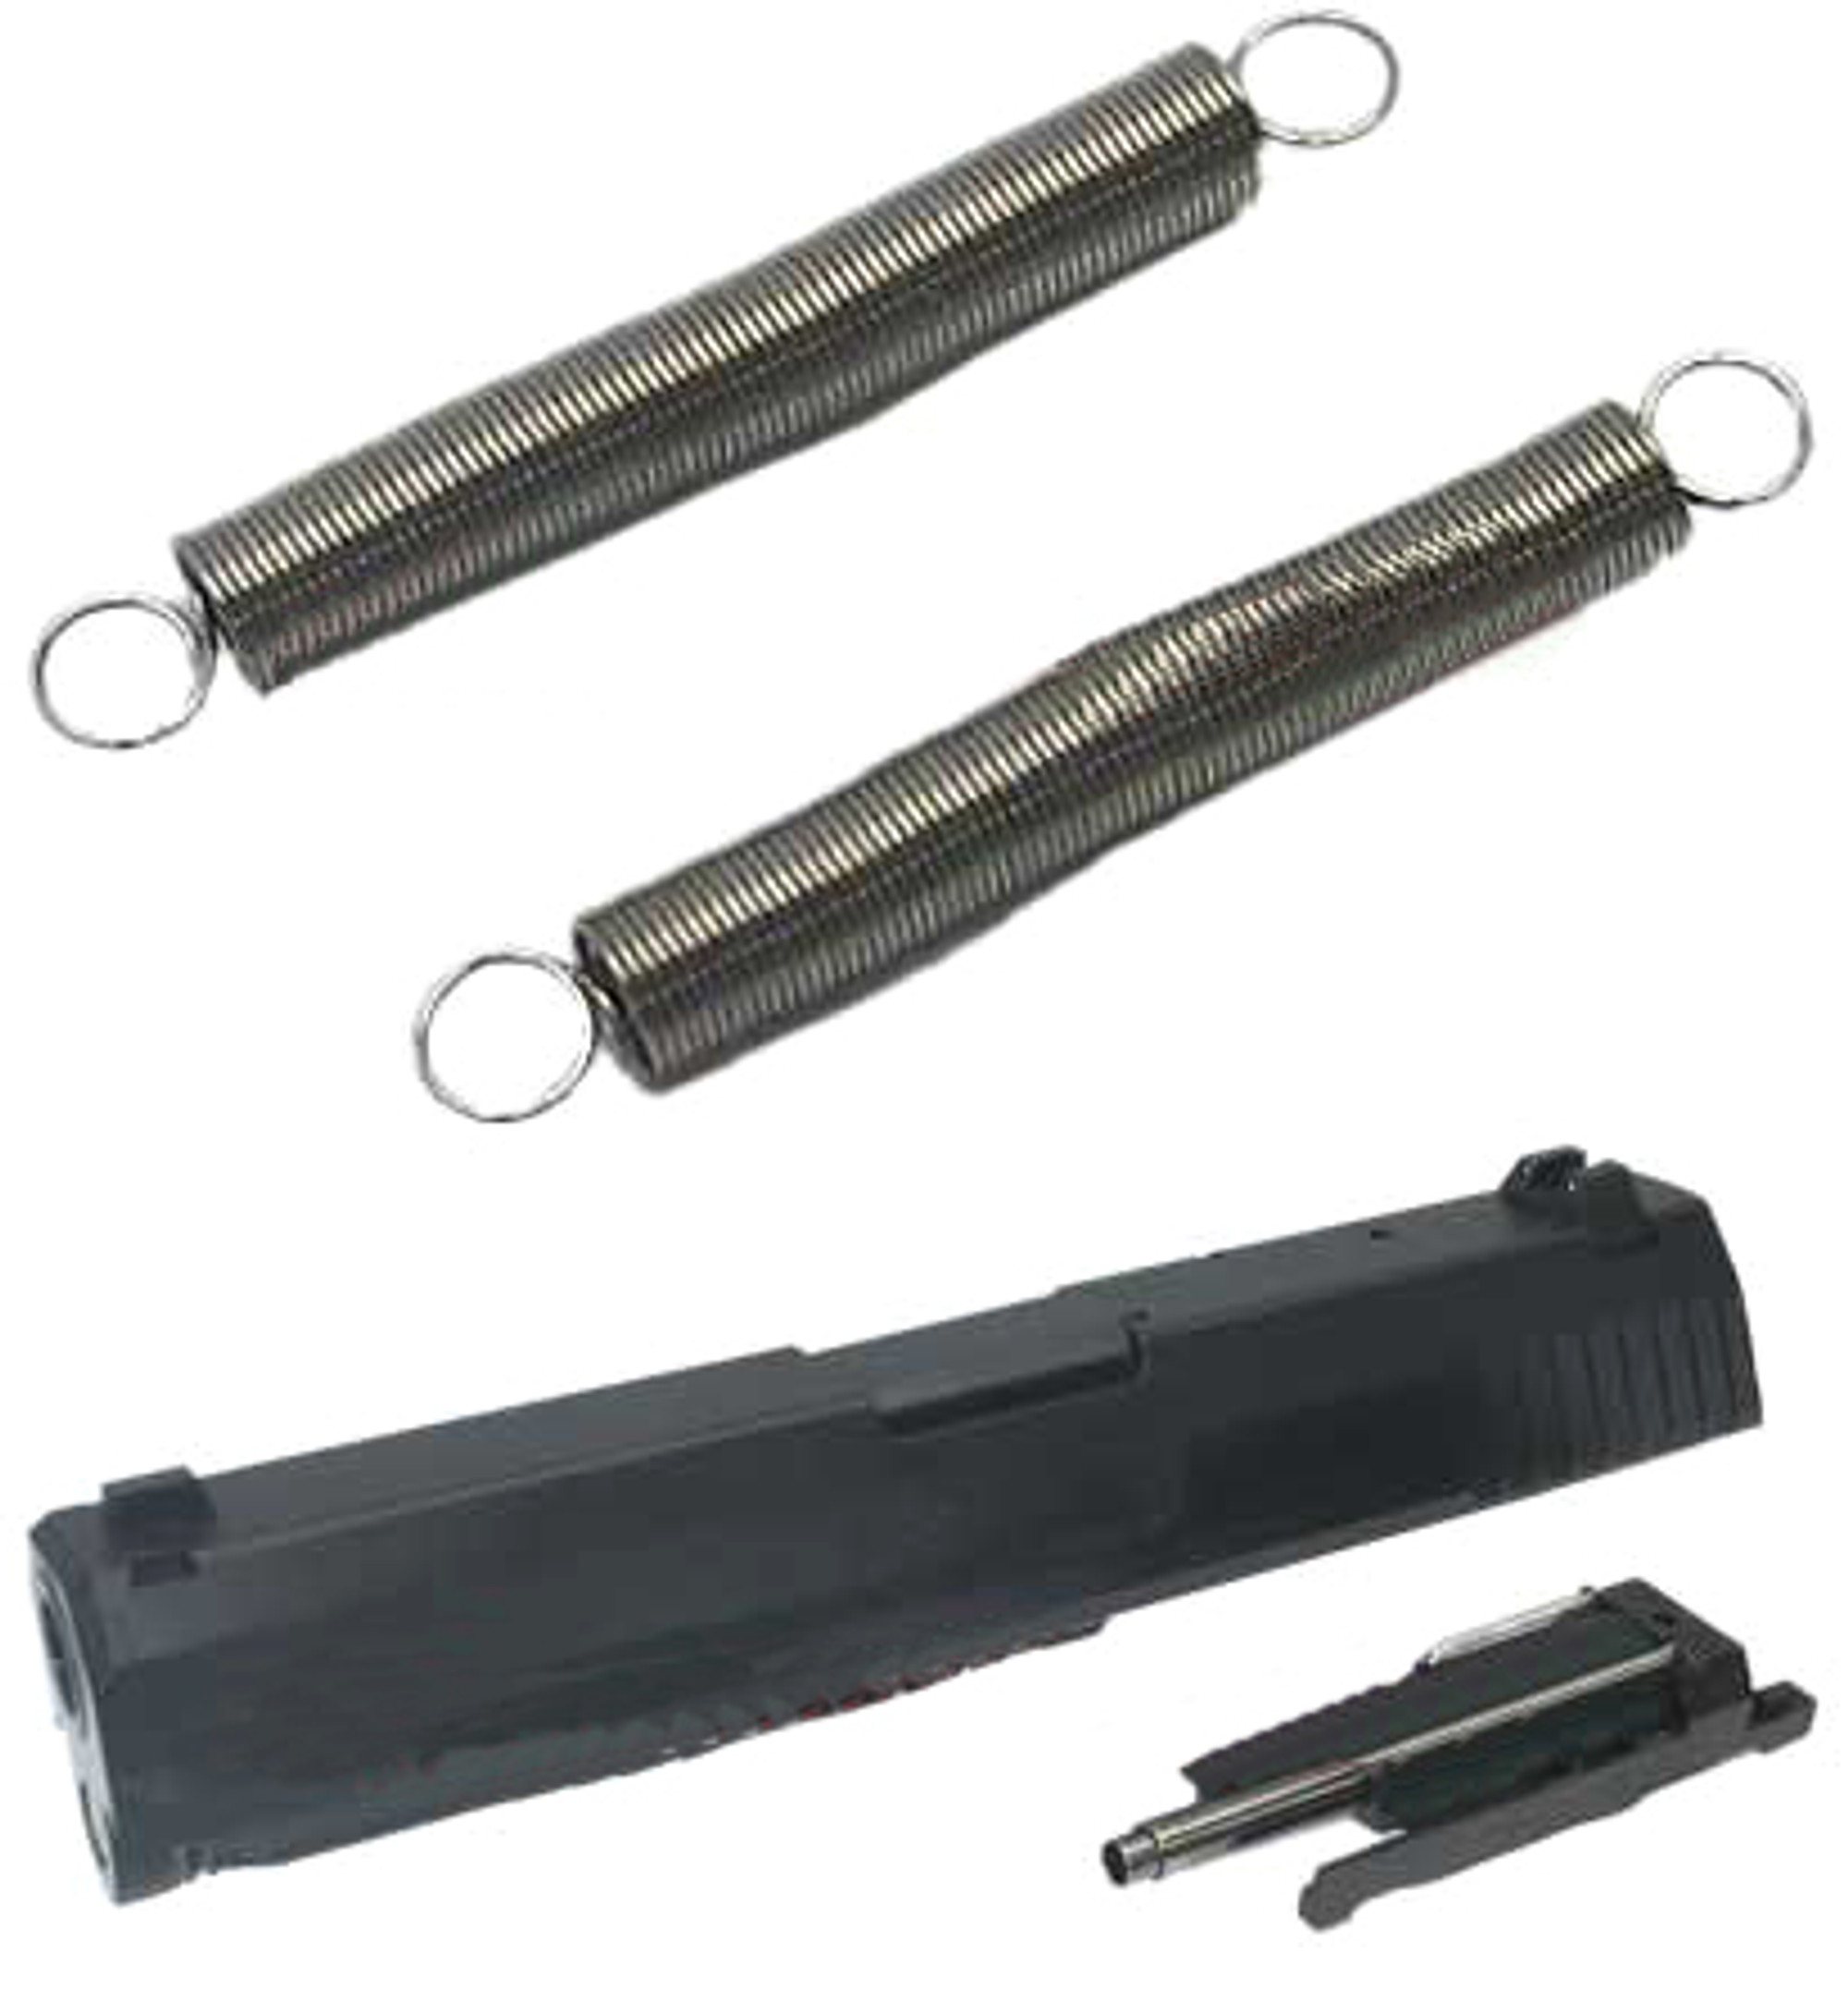 King Arms Reinforced Spring Set for KSC / KWA USP / KP8 Series GBB